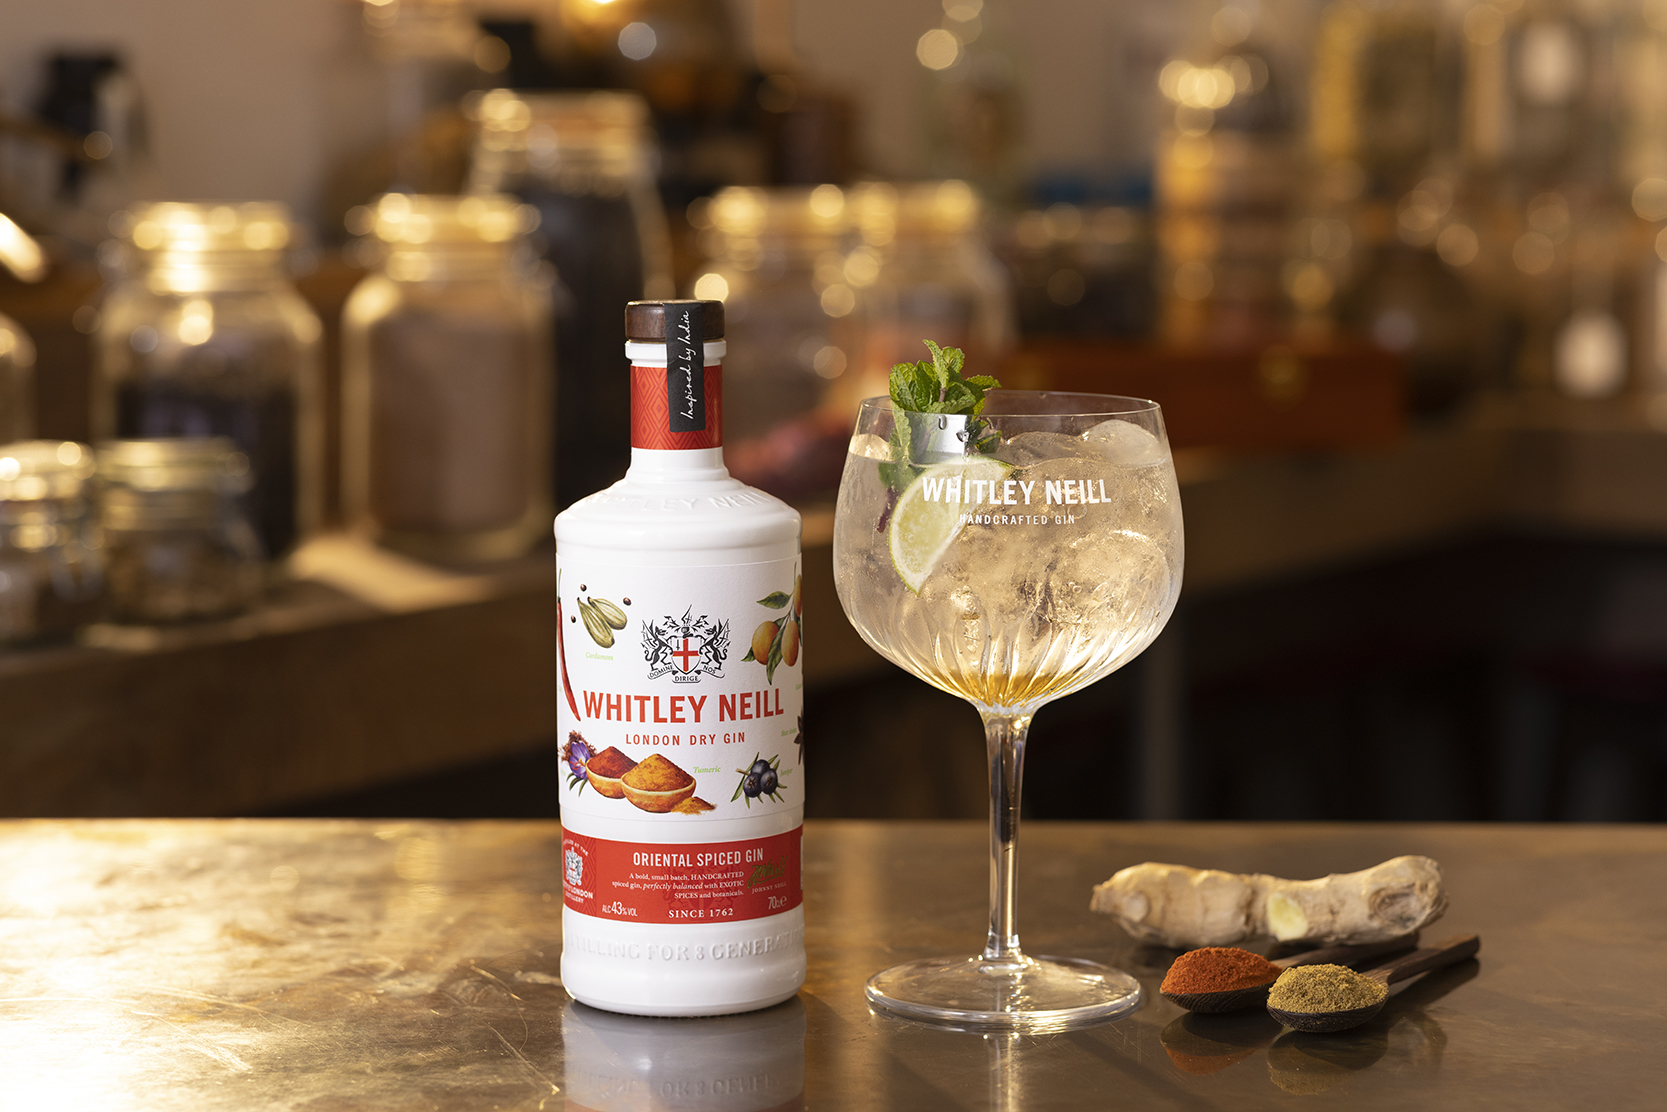 Whitley Neill Oriental Spiced Gin - Spice Route Mule cocktail copa serve